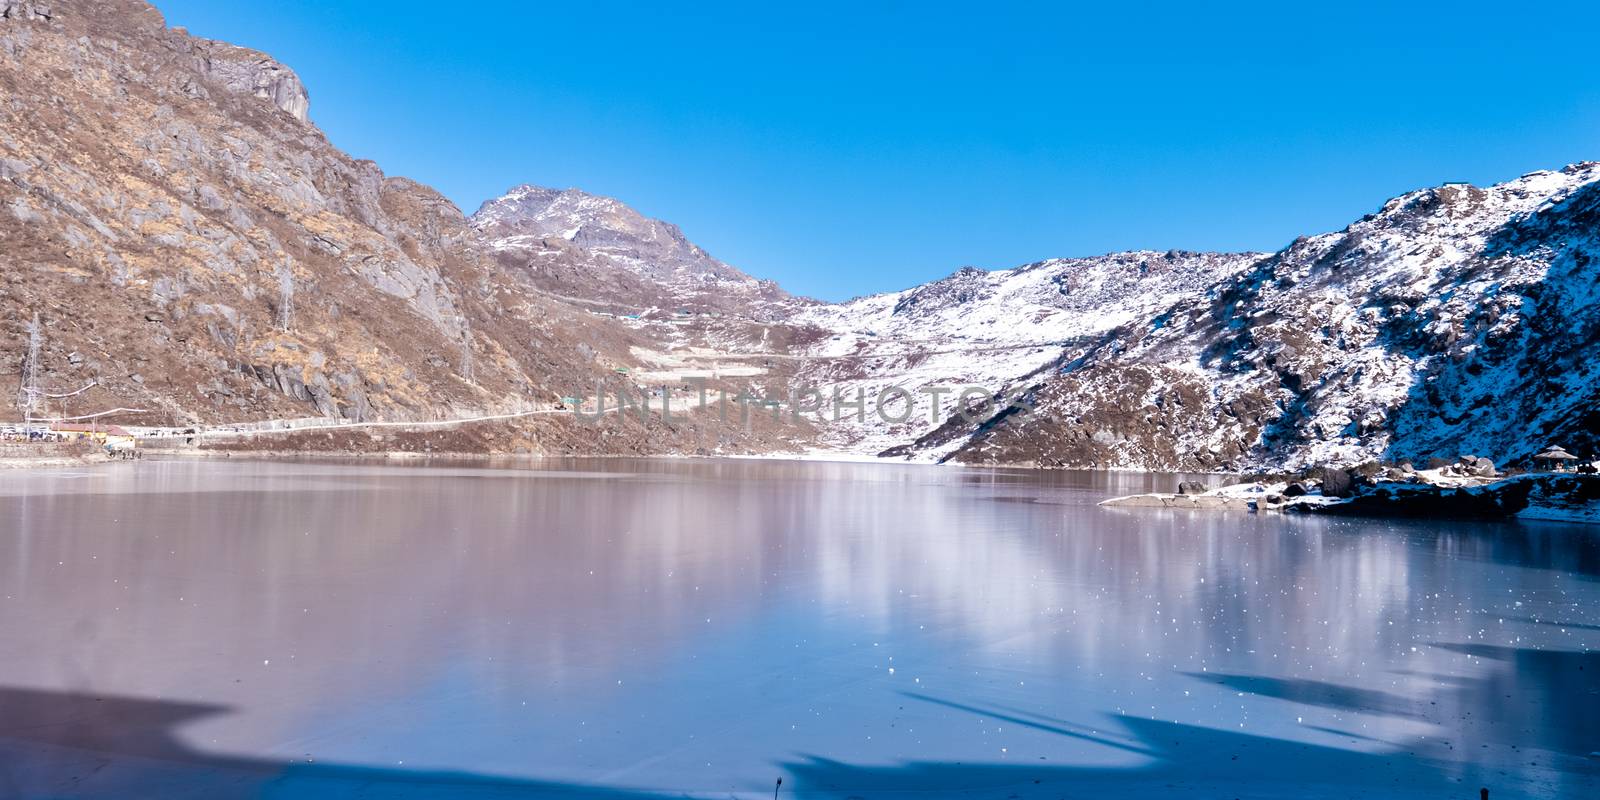 Tsomgo Lake (Tsongmo or Changu Lake) frozen during winter season. It is a glacial lake in East Gangtok Sikkim of India. Lake surface reflects different colors with change of seasons. Landscape View by sudiptabhowmick